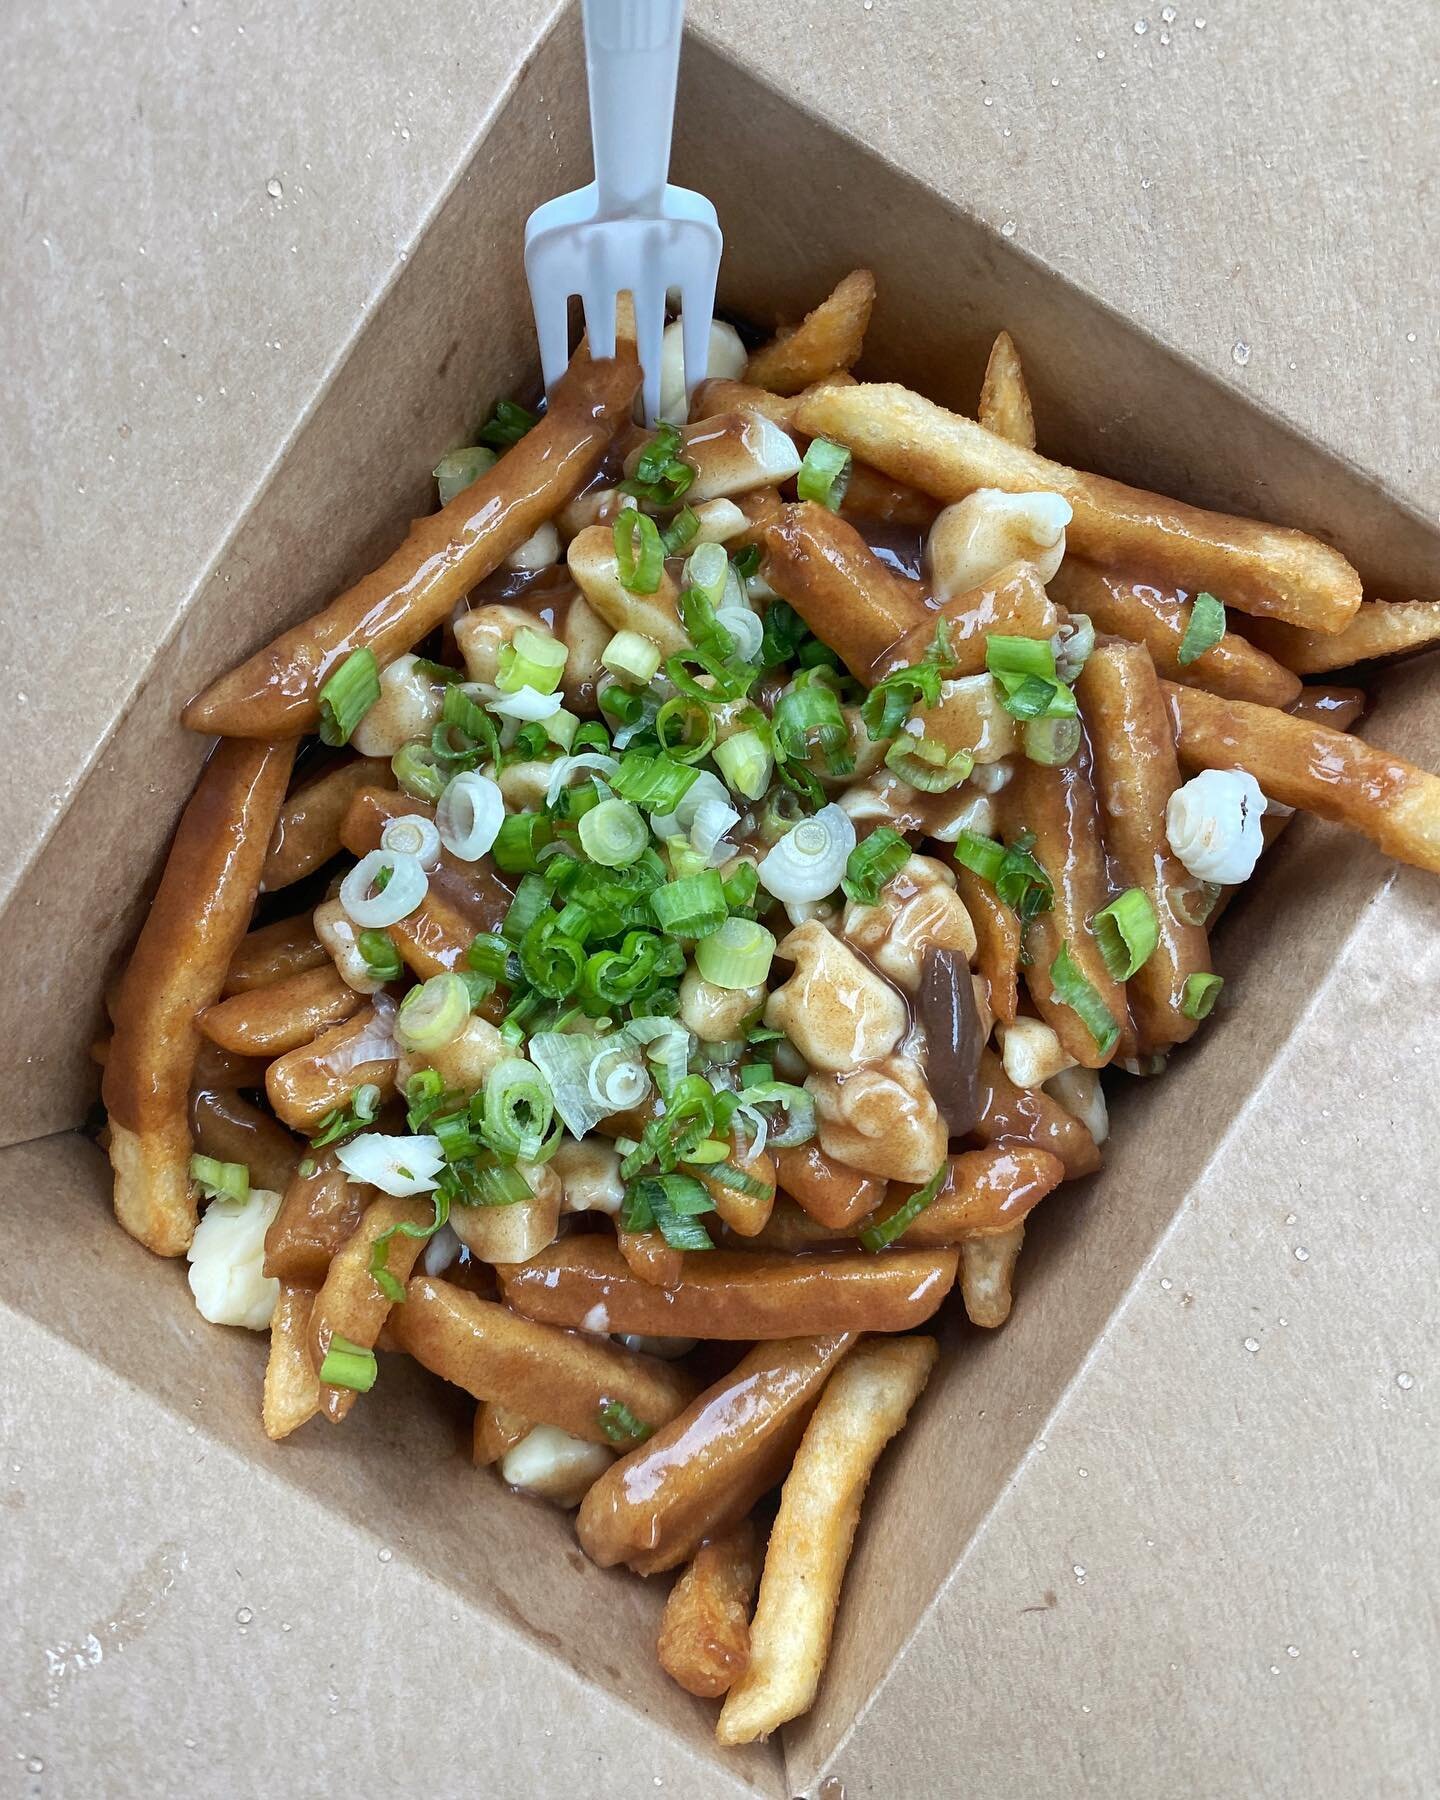 honouring meatless monday with poutine 🤭🍟 (mushroom gravy &amp; extra cheese curds obvs lol)

@stephwants you to tag someone you&rsquo;d share poutine with 😍&hearts;️🍟⬇️🔥
&mdash;
#poutine #fries #vegetarian #canadian #cheatdayeats